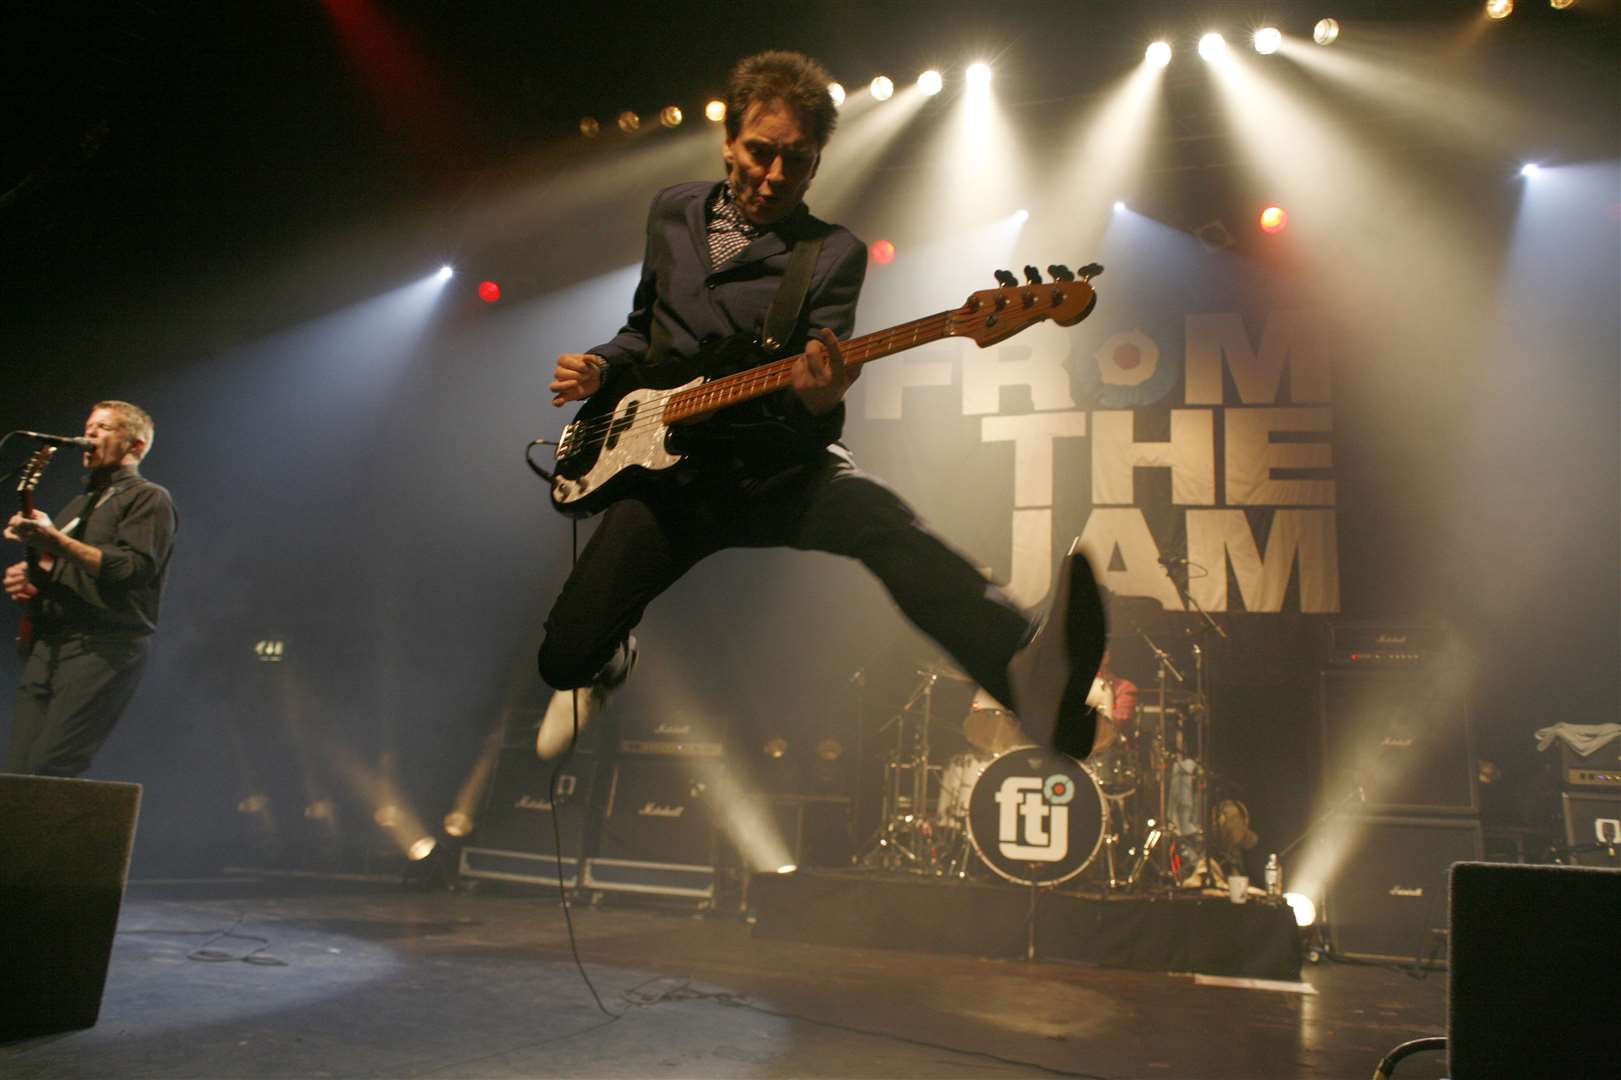 From The Jam and The Jam's Bruce Foxton will be performing in Gillingham this week